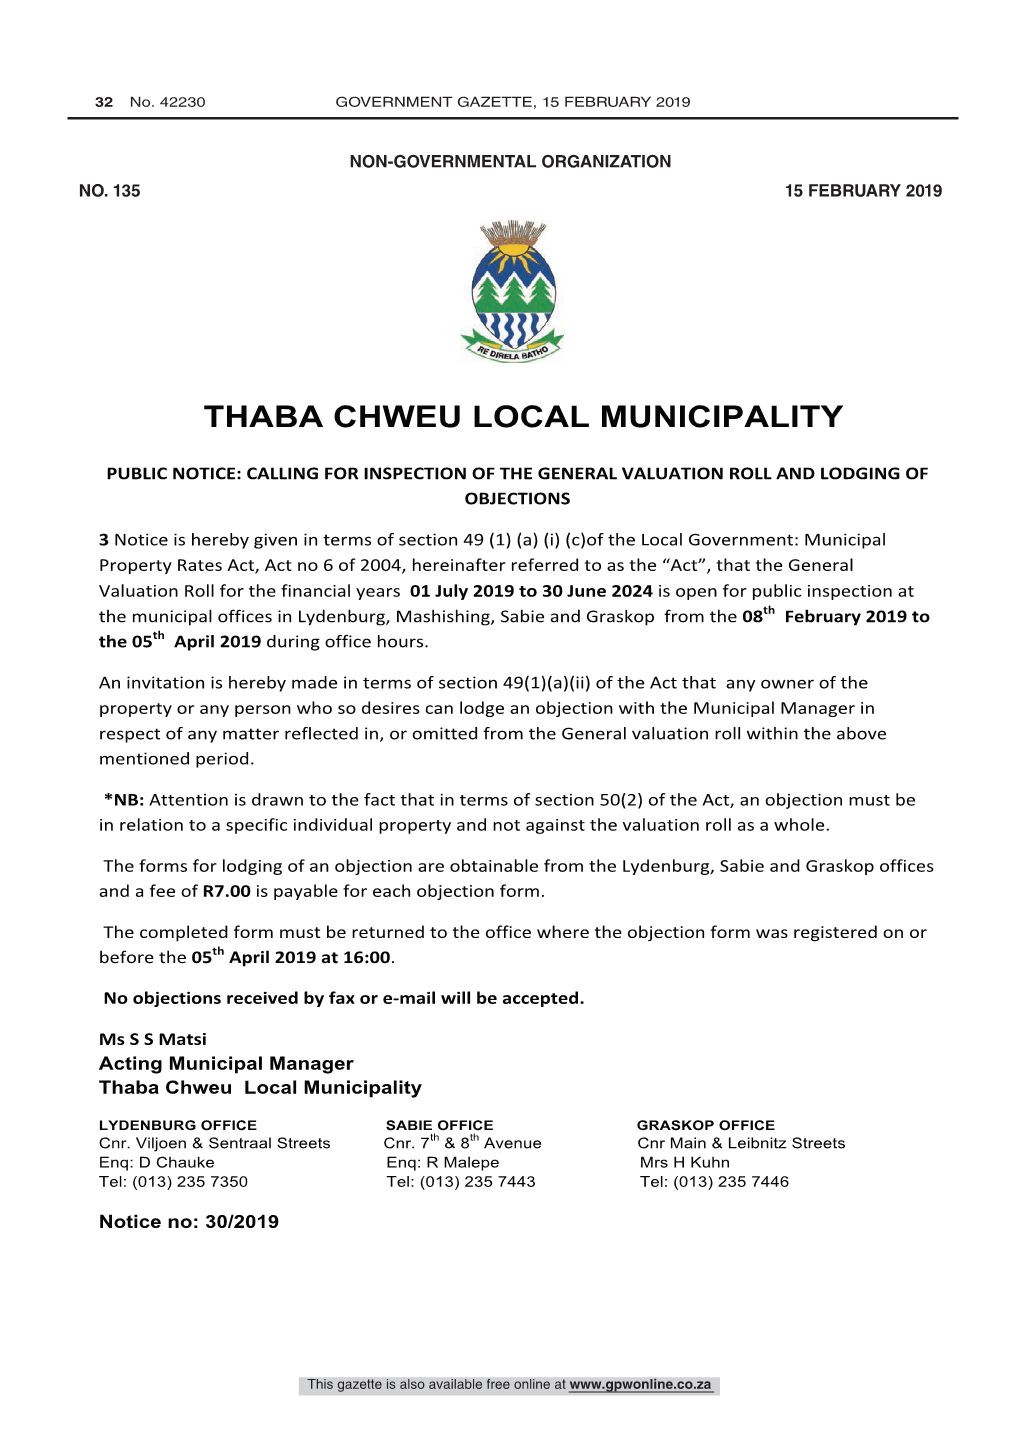 Thaba Chweu Local Municipality: Inspection of General Valuation Roll